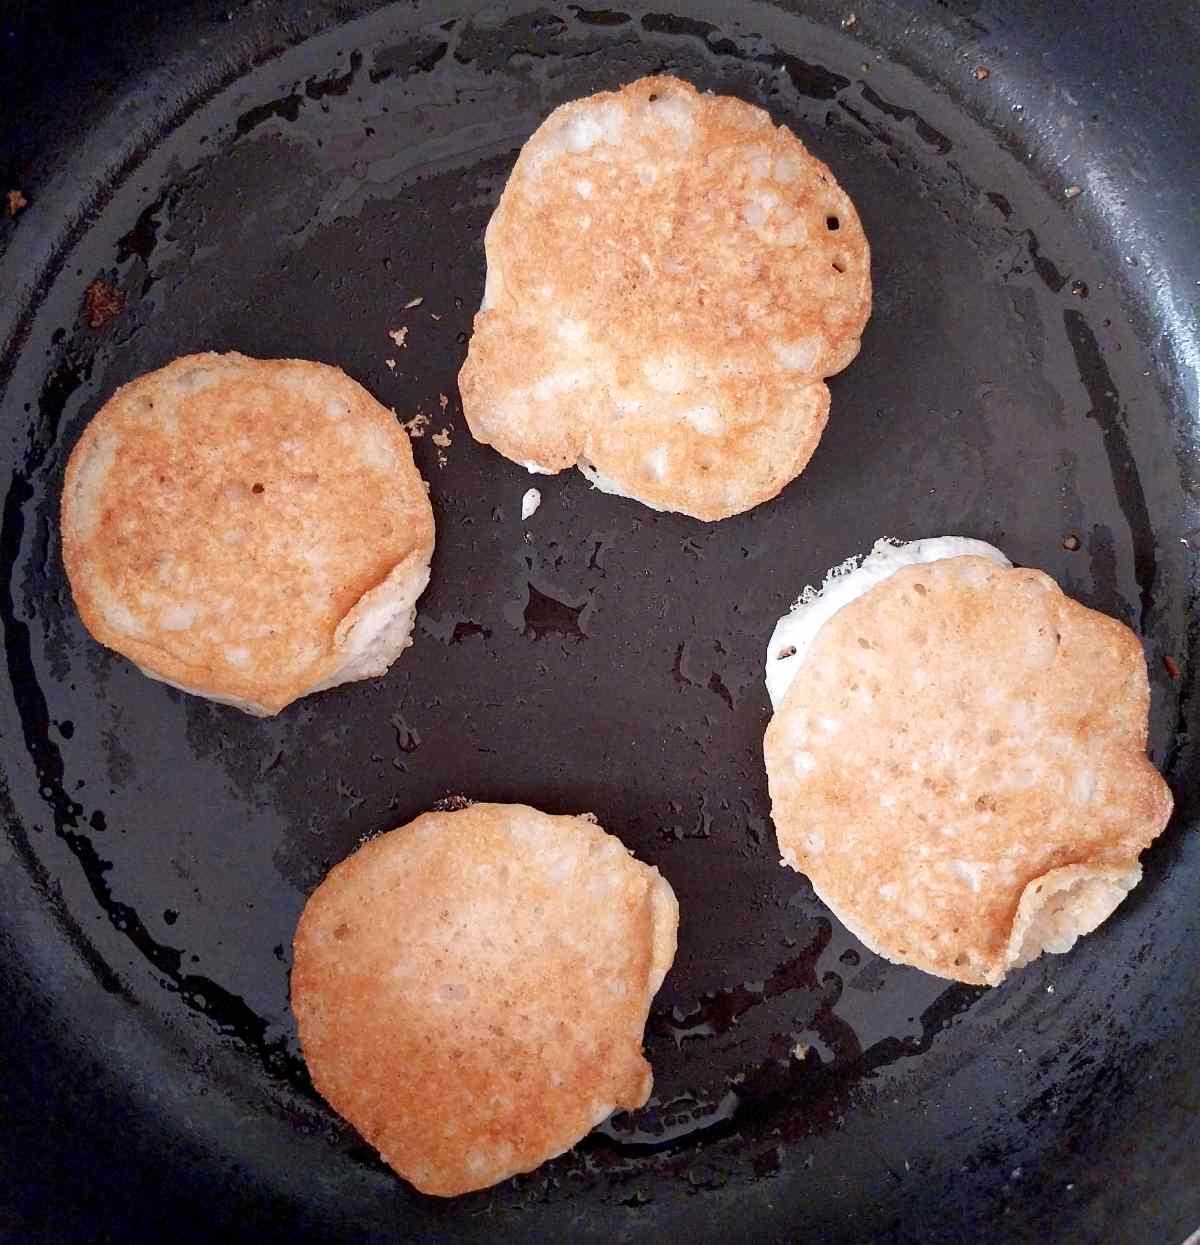 Frying the crumpets on the other side.